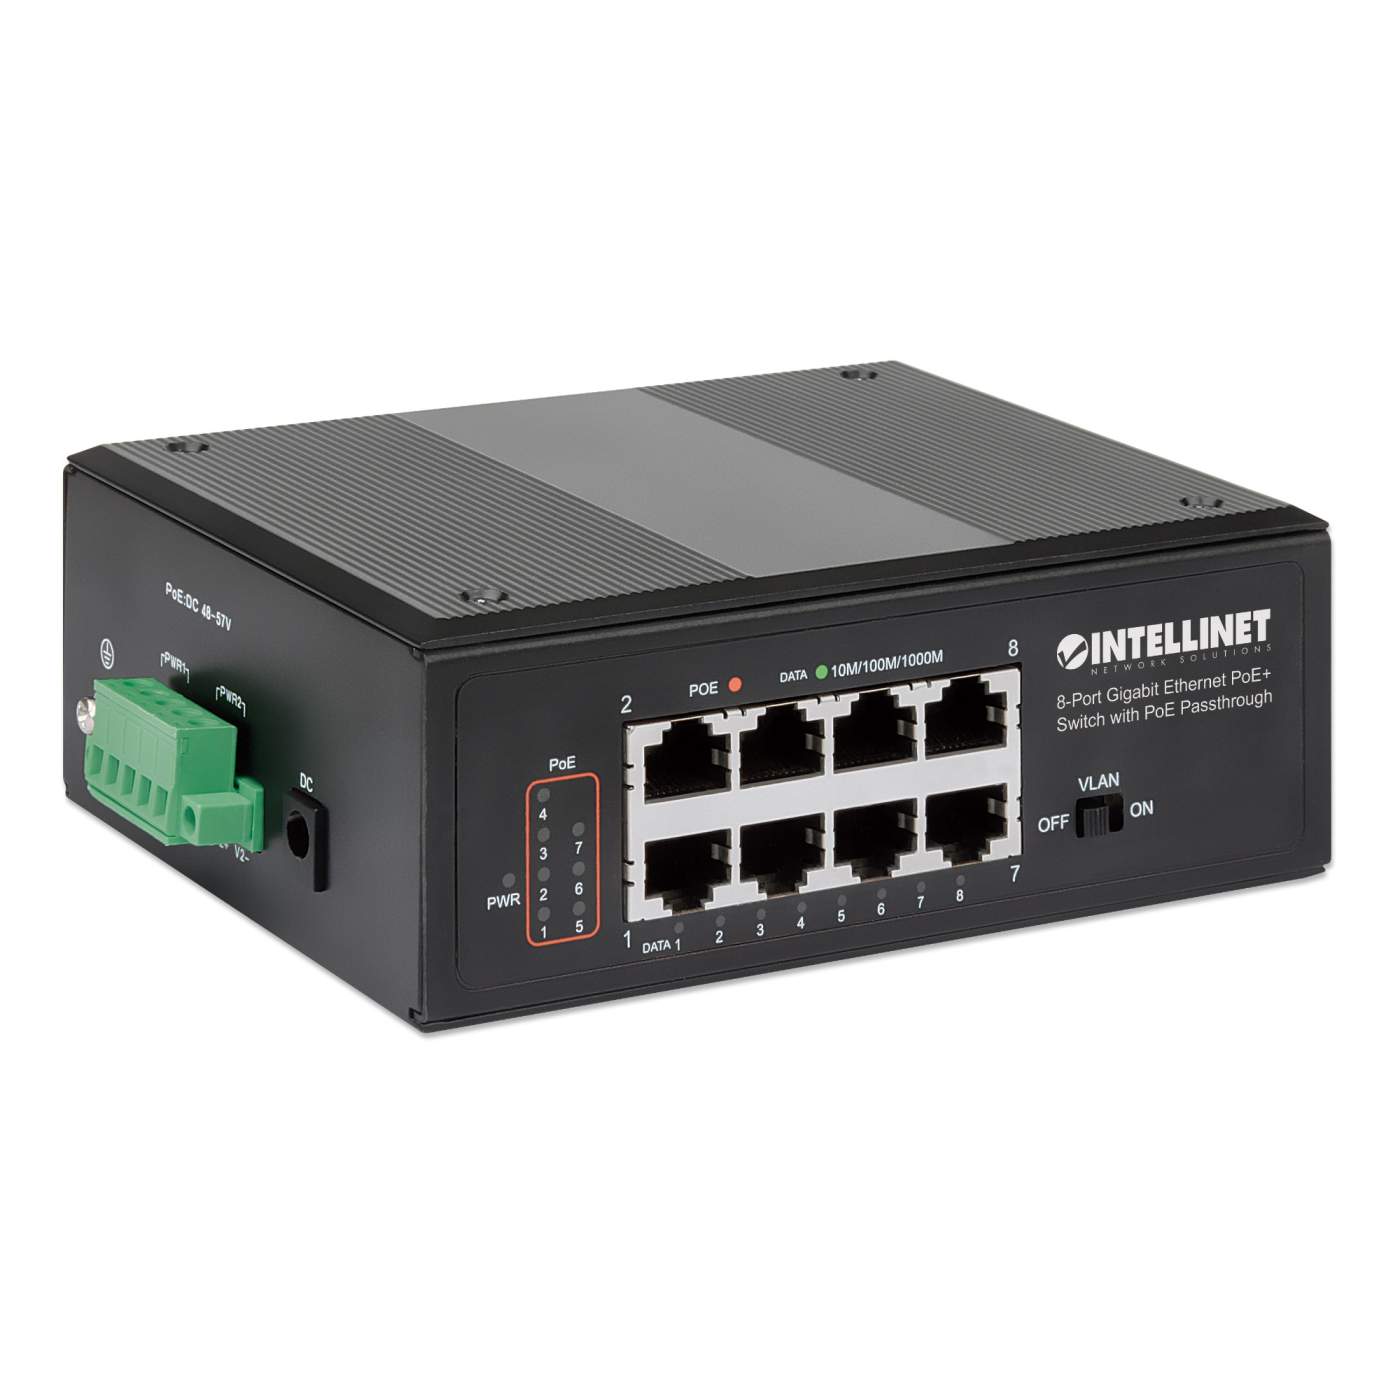 PoE-Powered 8-Port Gigabit Ethernet PoE+ Industrial Switch with PoE Passthrough Image 3